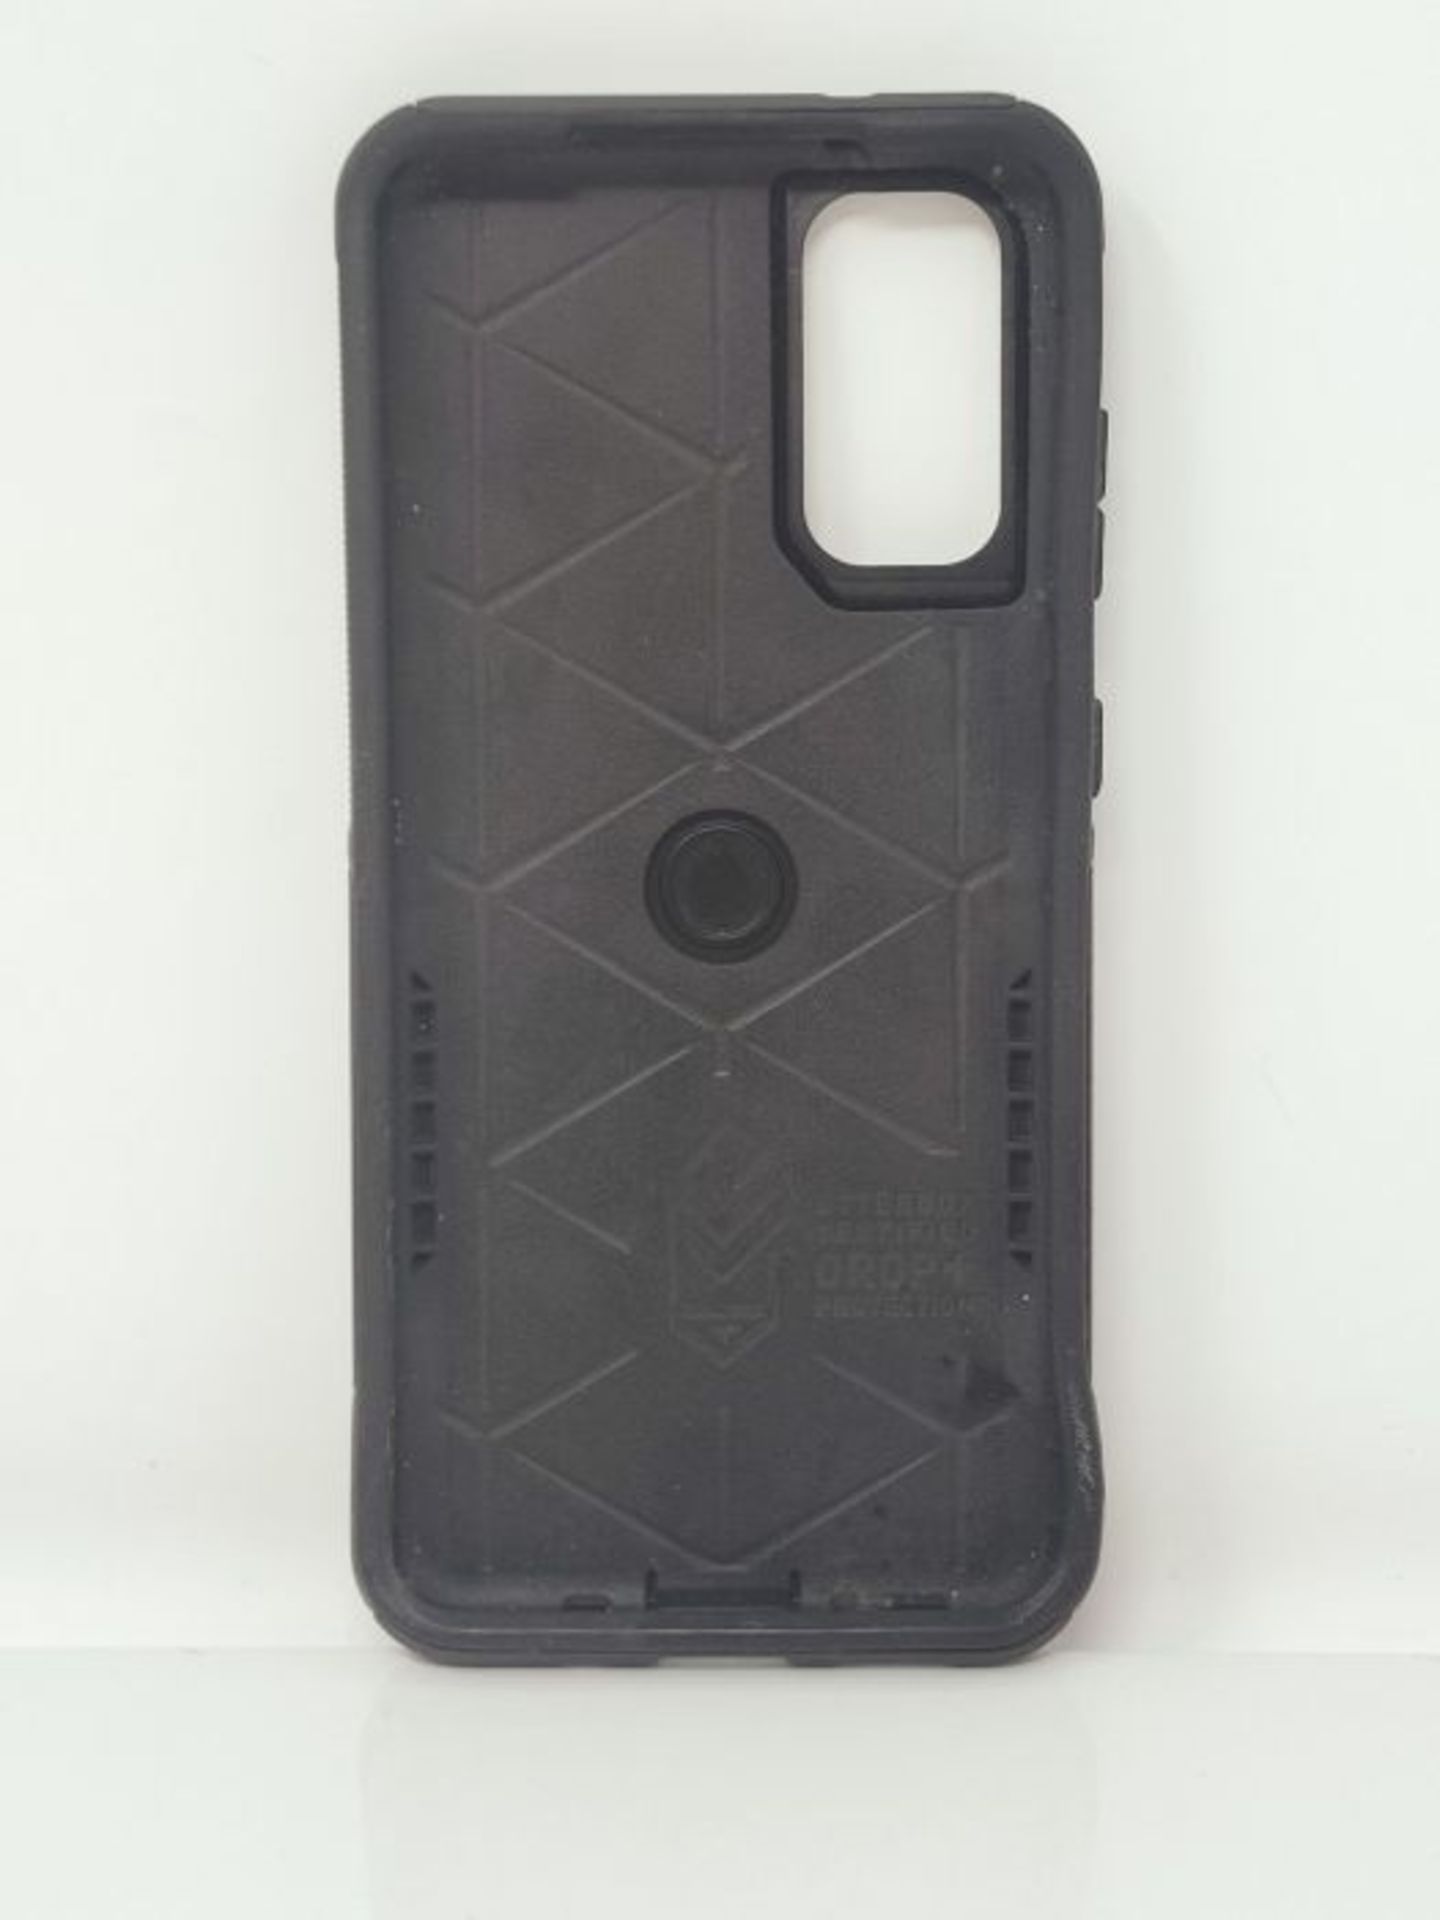 Galaxy S20/Galaxy S20 5G Case - Commuter Series - Image 2 of 2